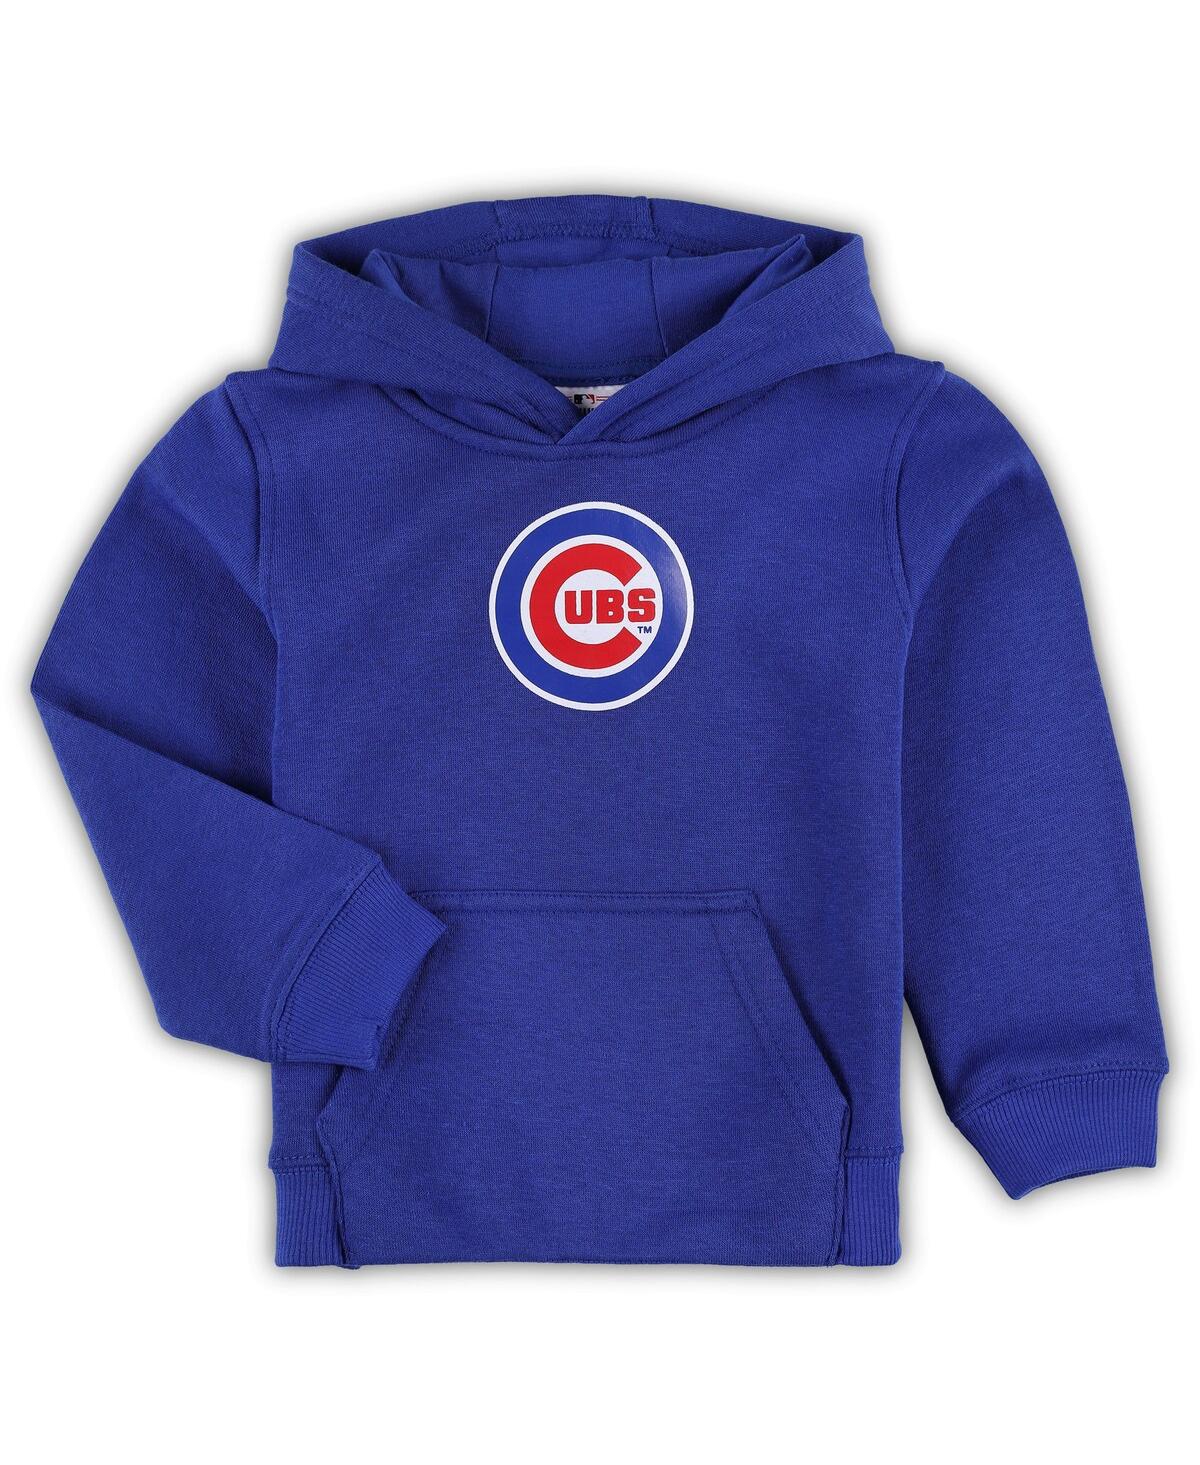 Outerstuff Cubs New Beginnings Pullover Hooded Sweatshirt for Kids